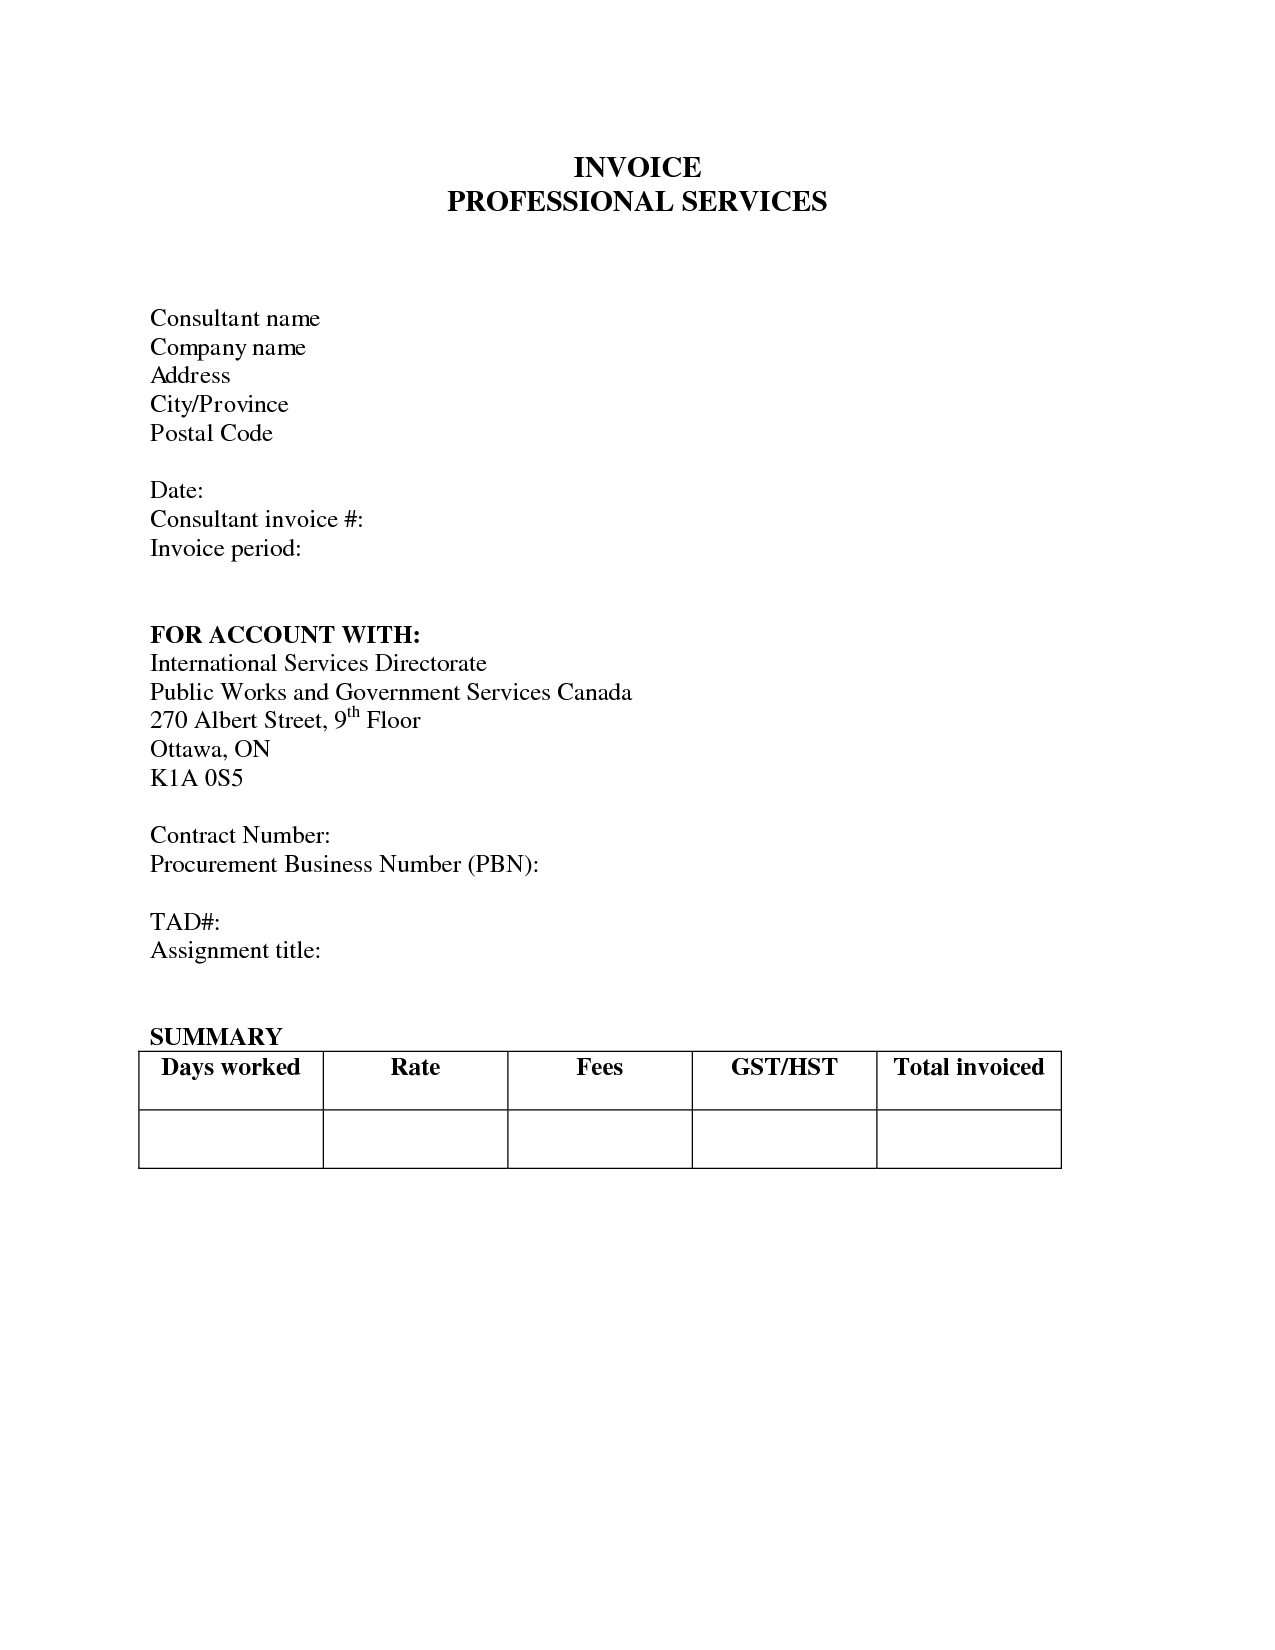 professional services invoice template photo professional service invoice template images 1275 X 1650